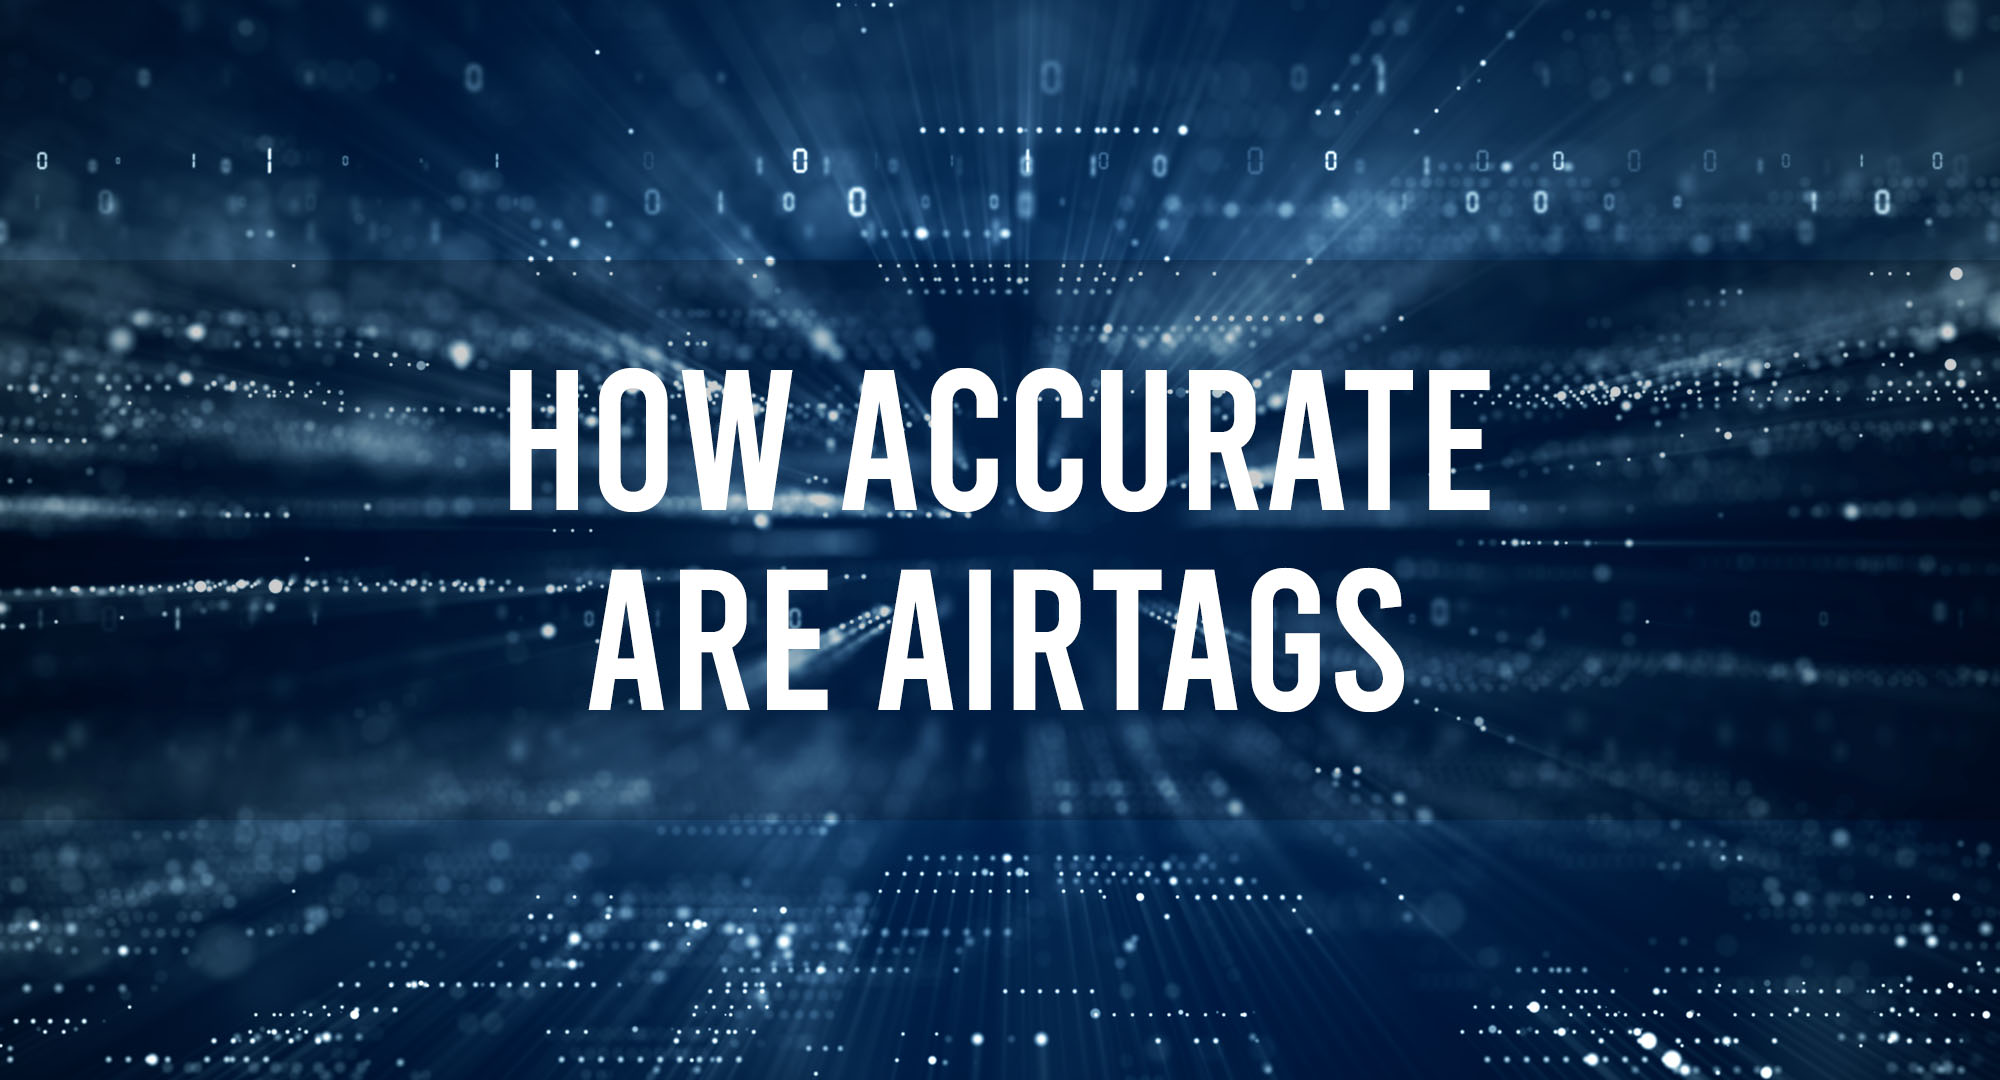 How accurate are airtags